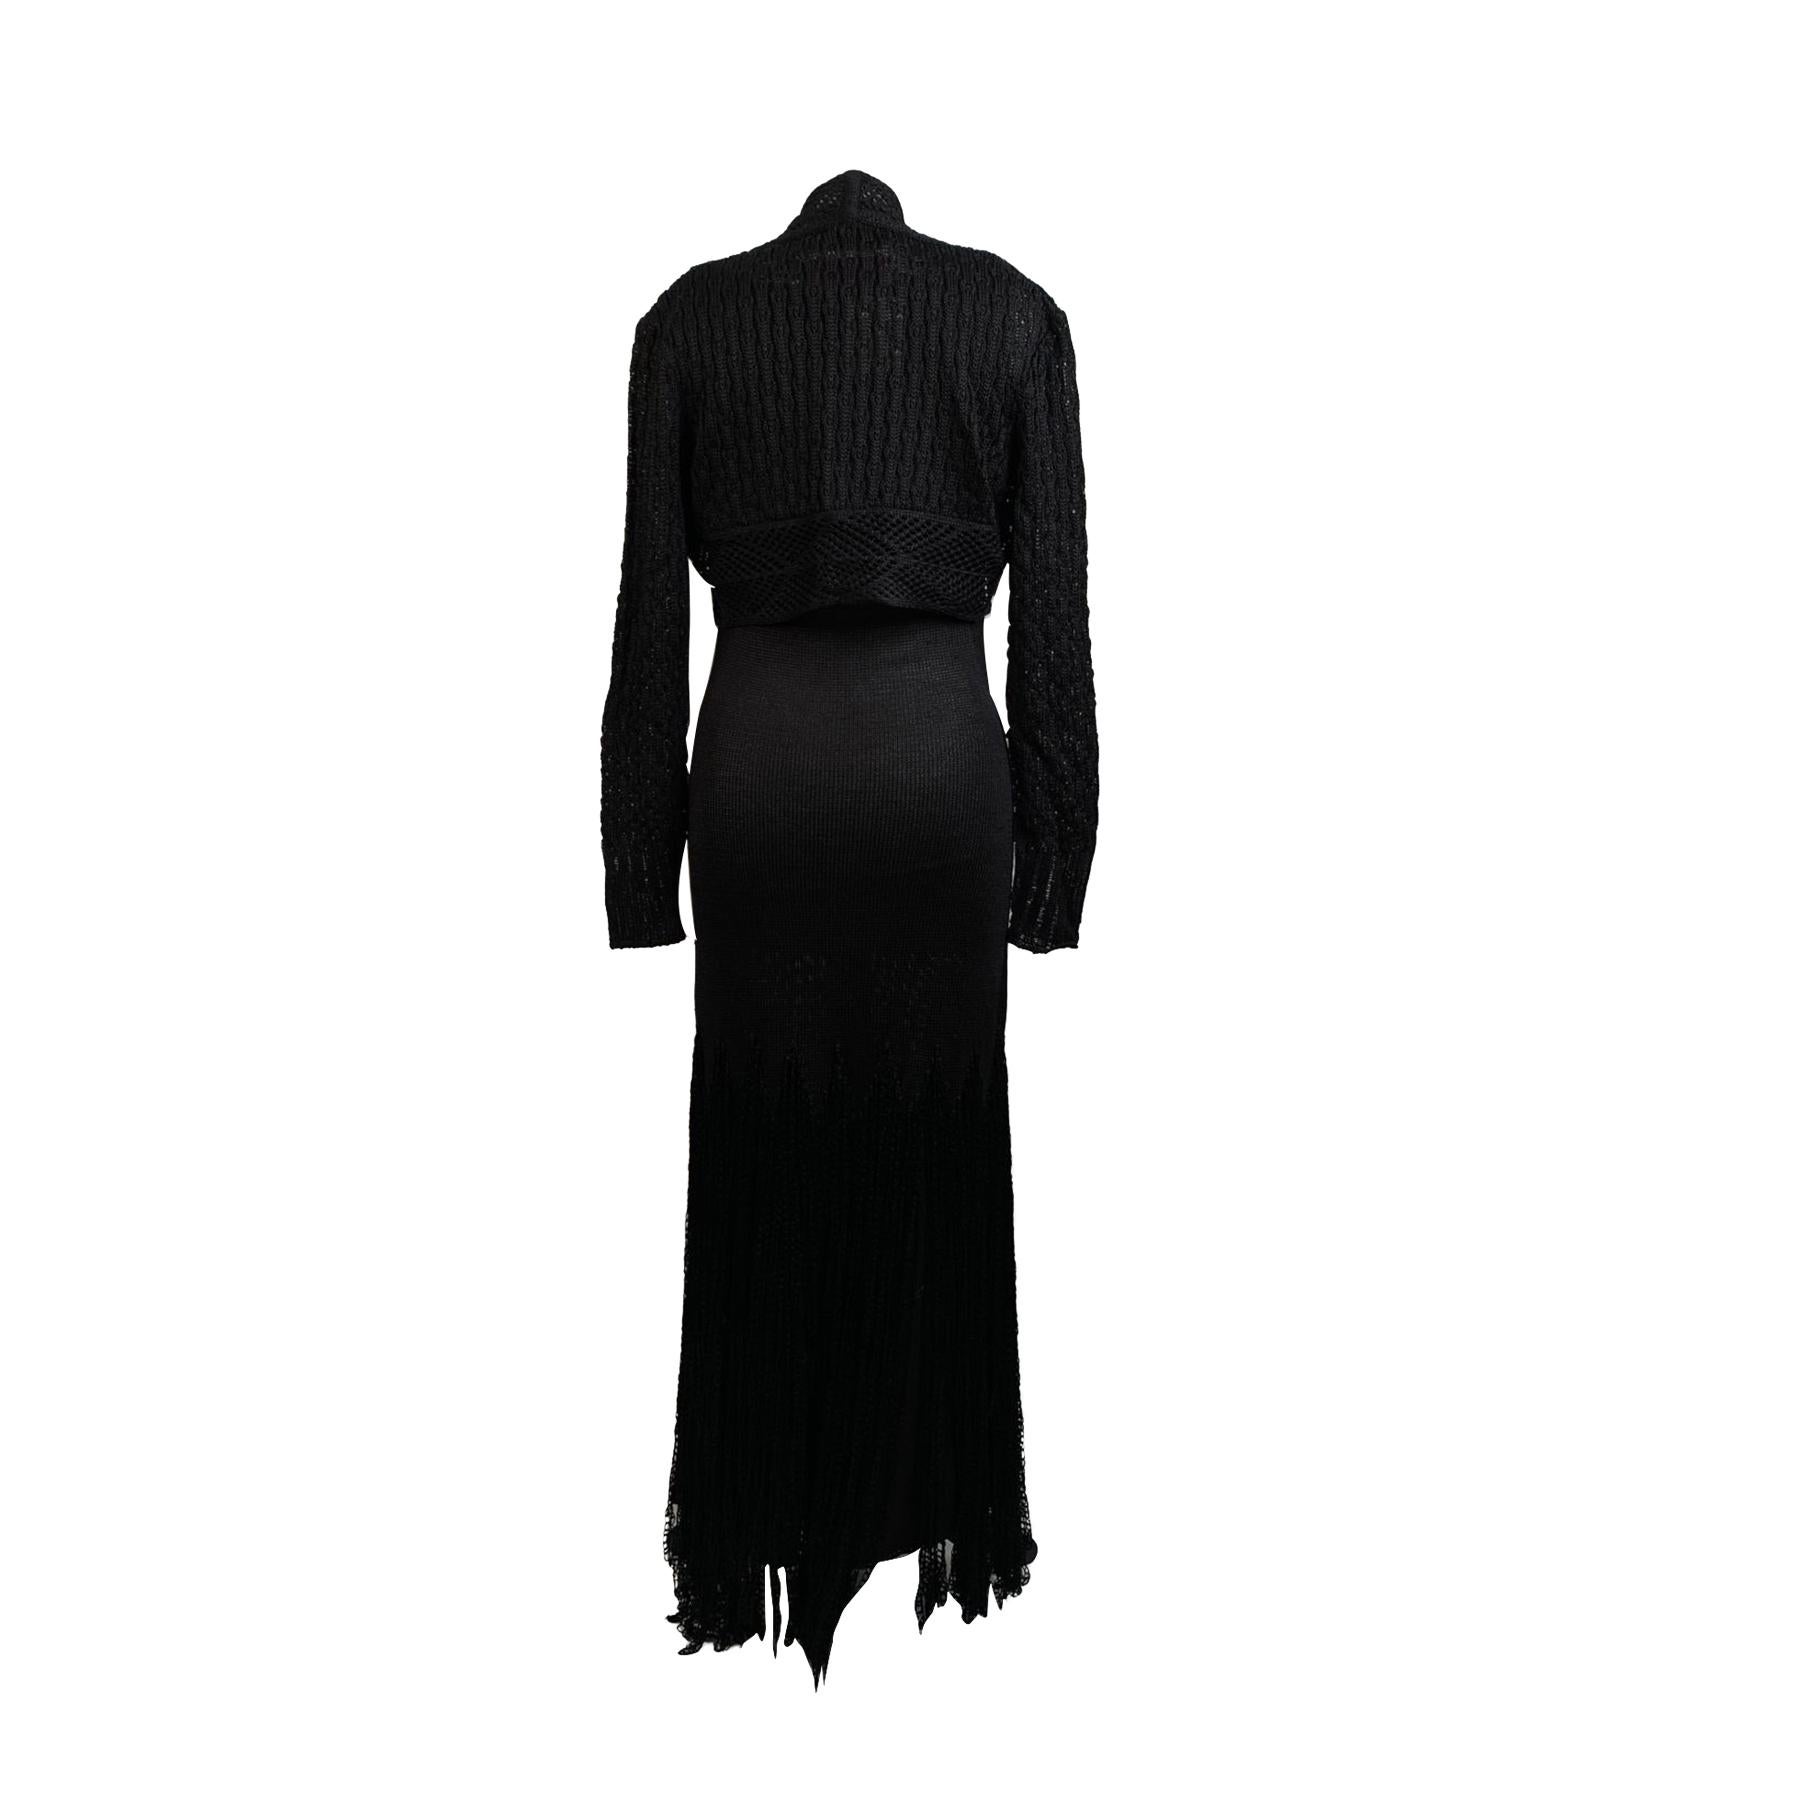 Beautiful set by Christian Lacroix consisting of a maxi leeveless dress and a matching cropped jacket. The dress features a straight neckline with crochet detail and fringed detailing on the skirt. Composition: 100% Viscose. Unlined. Size is not